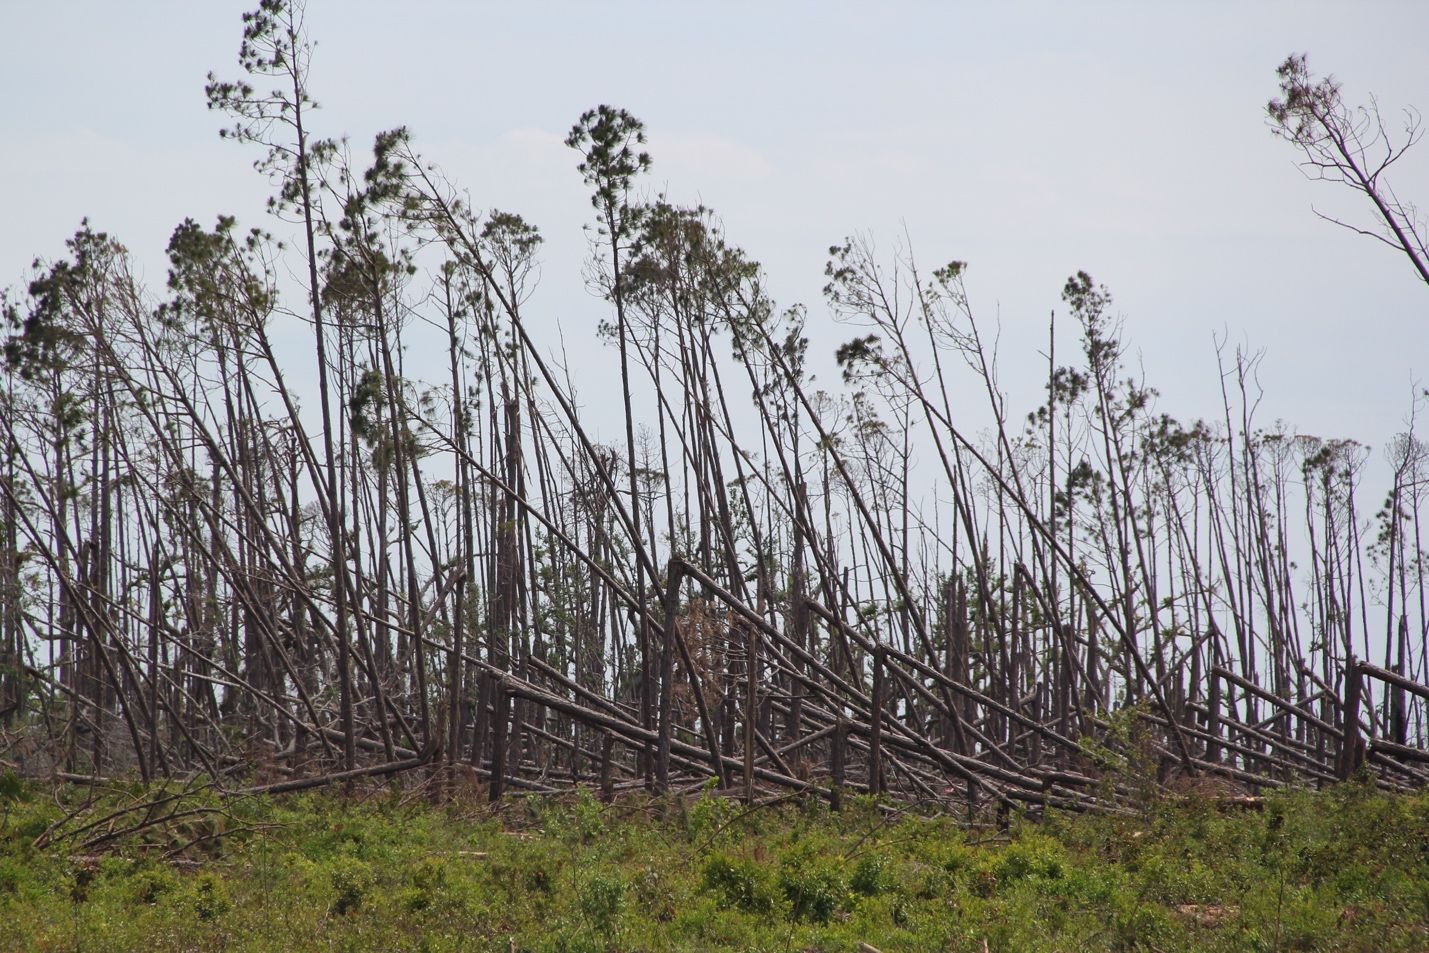 Hurricane Michael drastically transformed forests in northwest Florida, significantly altering fuels and potential fire behavior. 